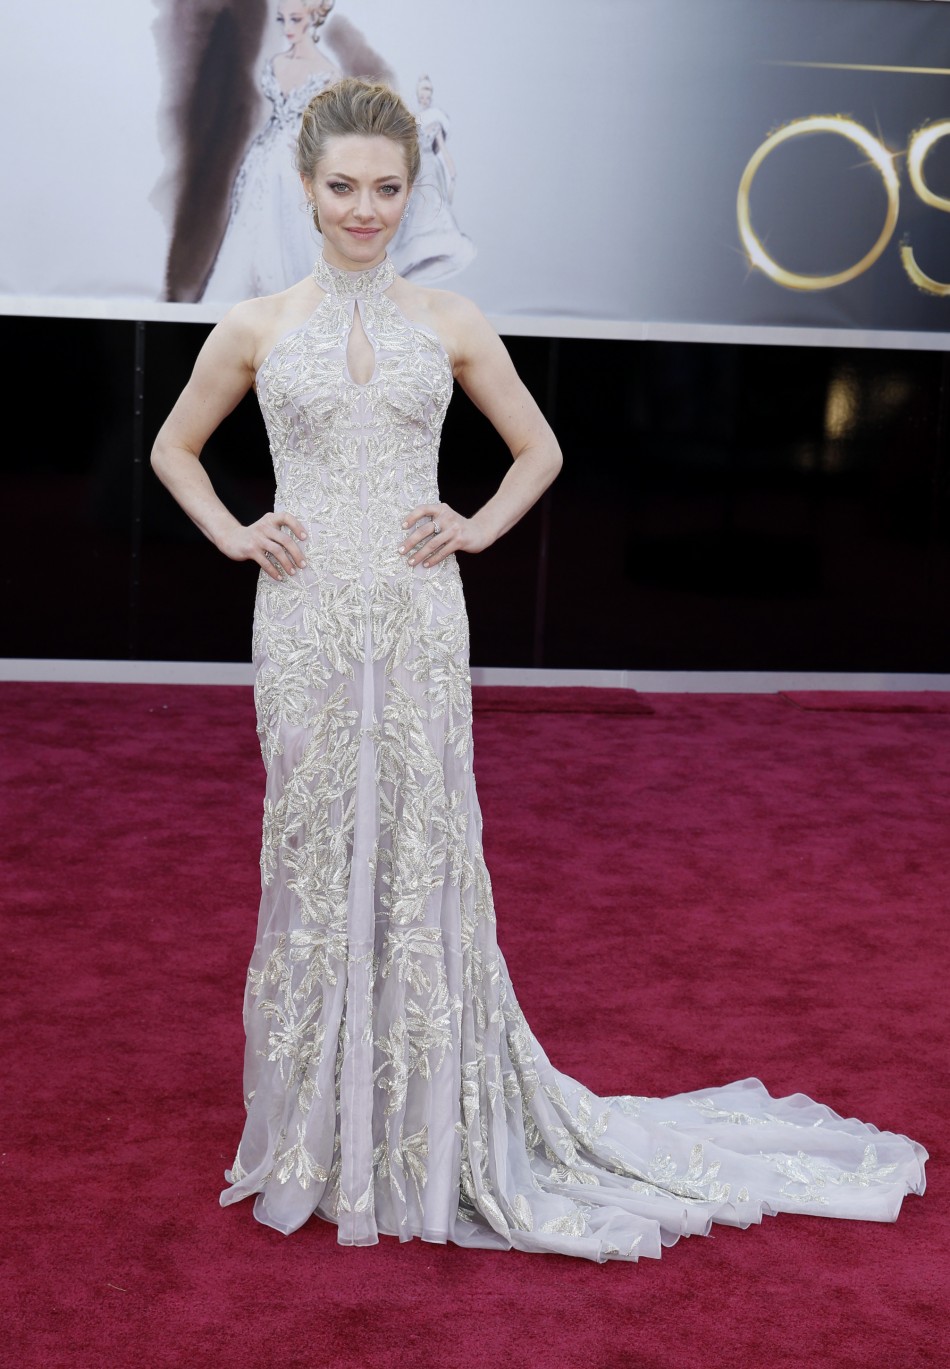 Actress Amanda Seyfried, from Les Miserables, wearing an Alexander McQueen dress, arrives at the 85th Academy Awards in Hollywood, California, February 24, 2013.